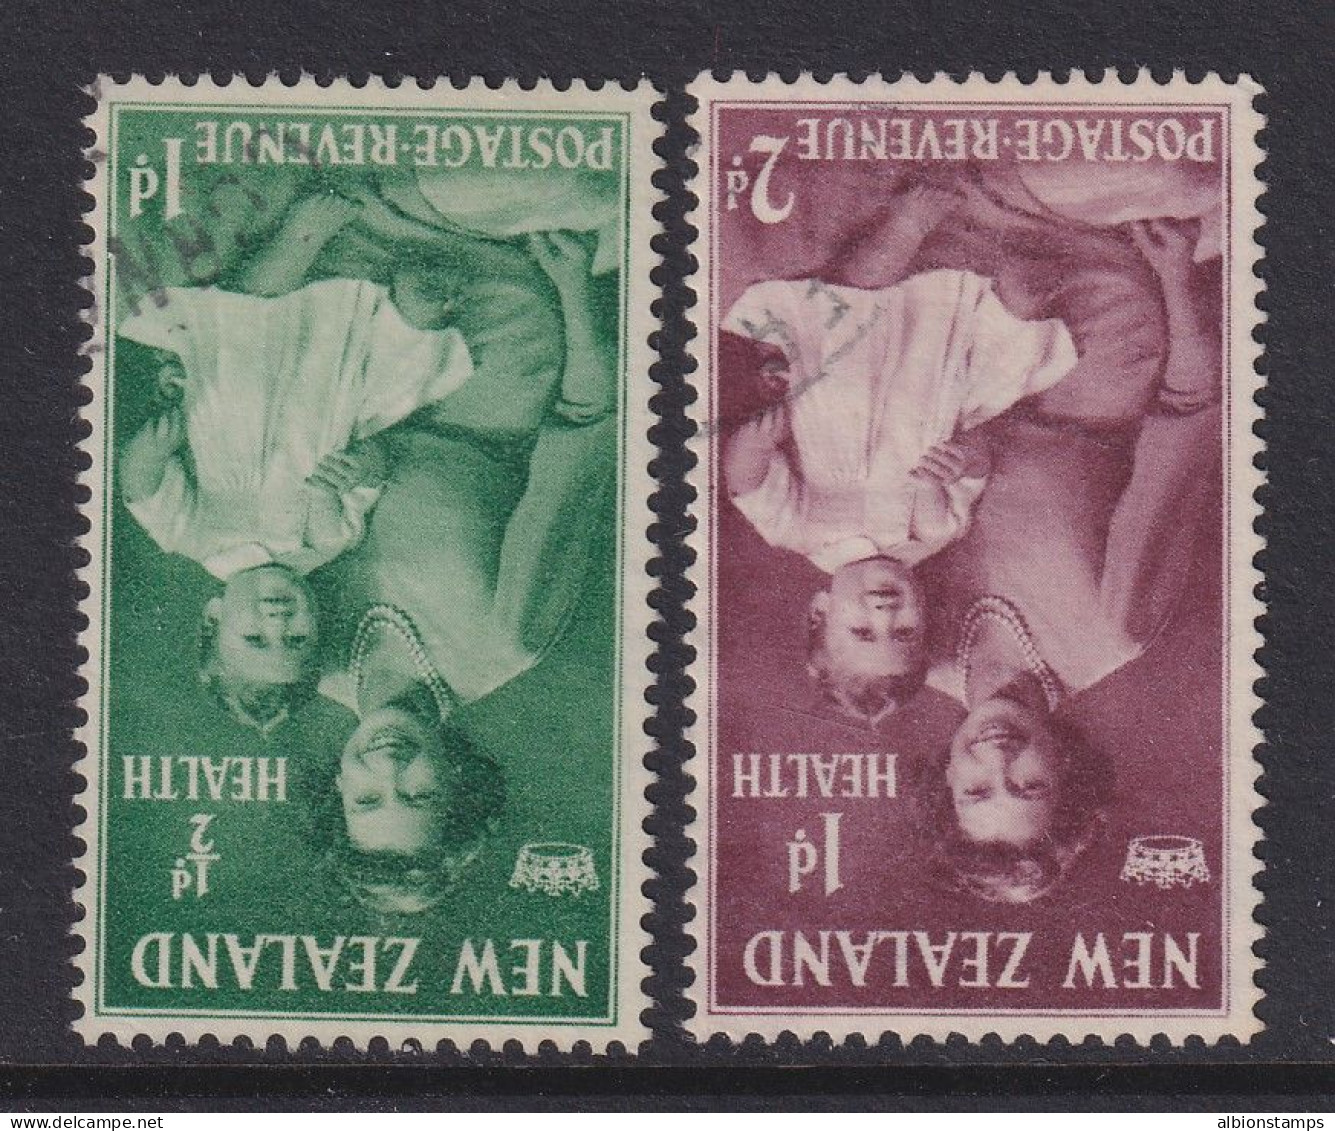 New Zealand, SG 701w-702w, Used "Inverted Watermark" Varieties - Oblitérés